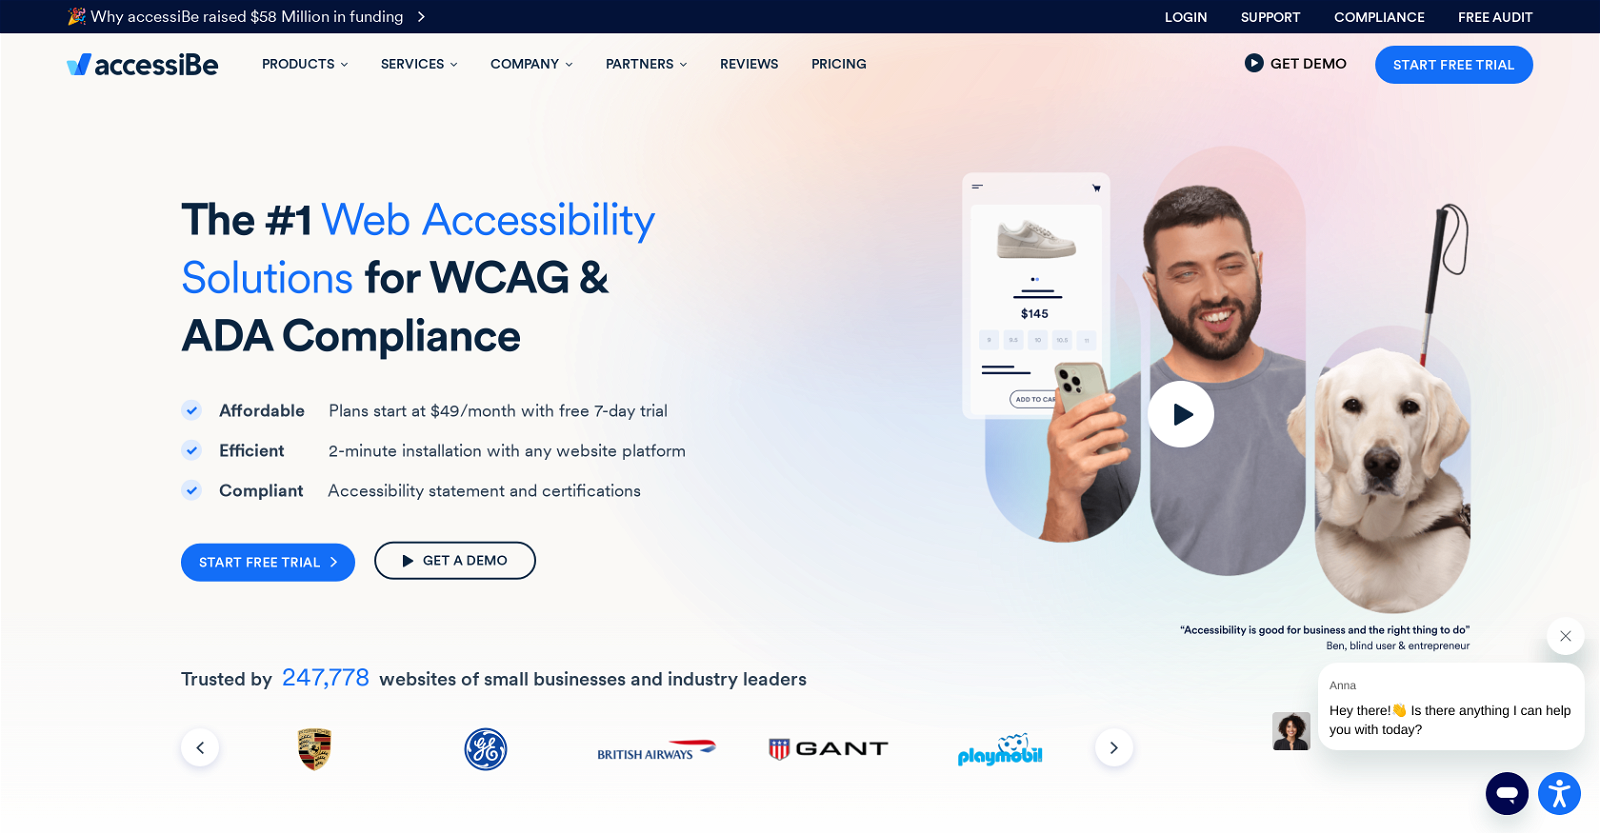 accessiBe website